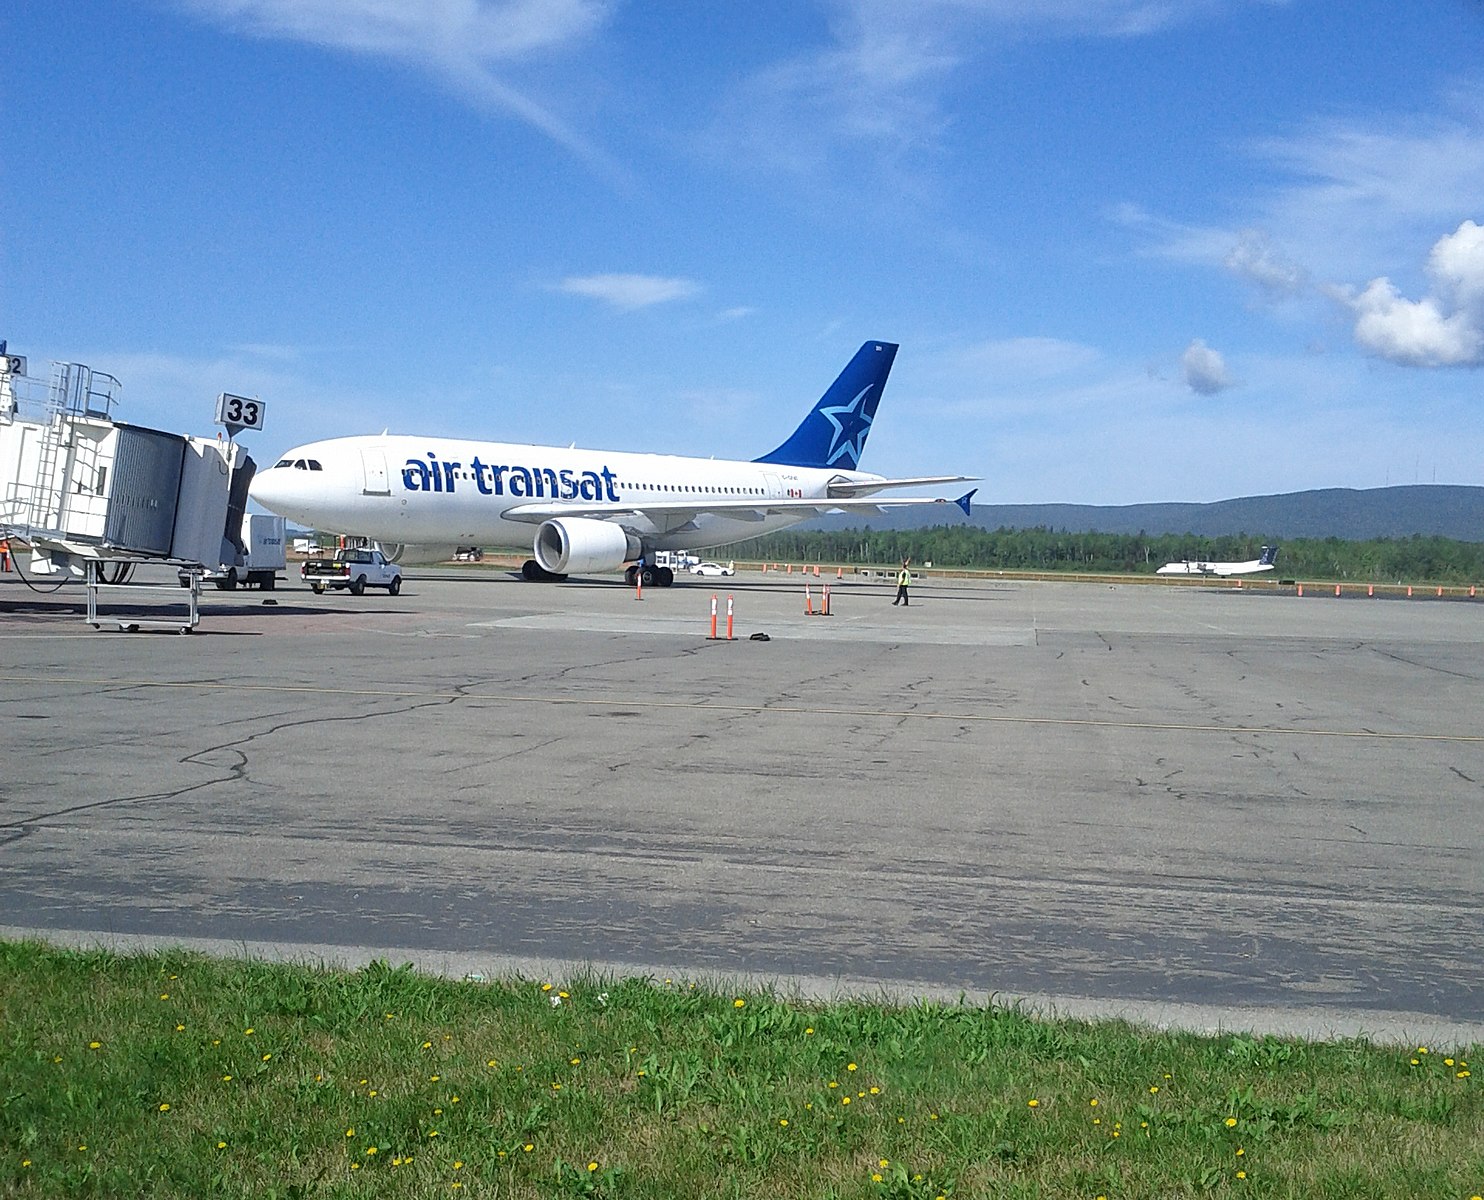 nearest airport to quebec city